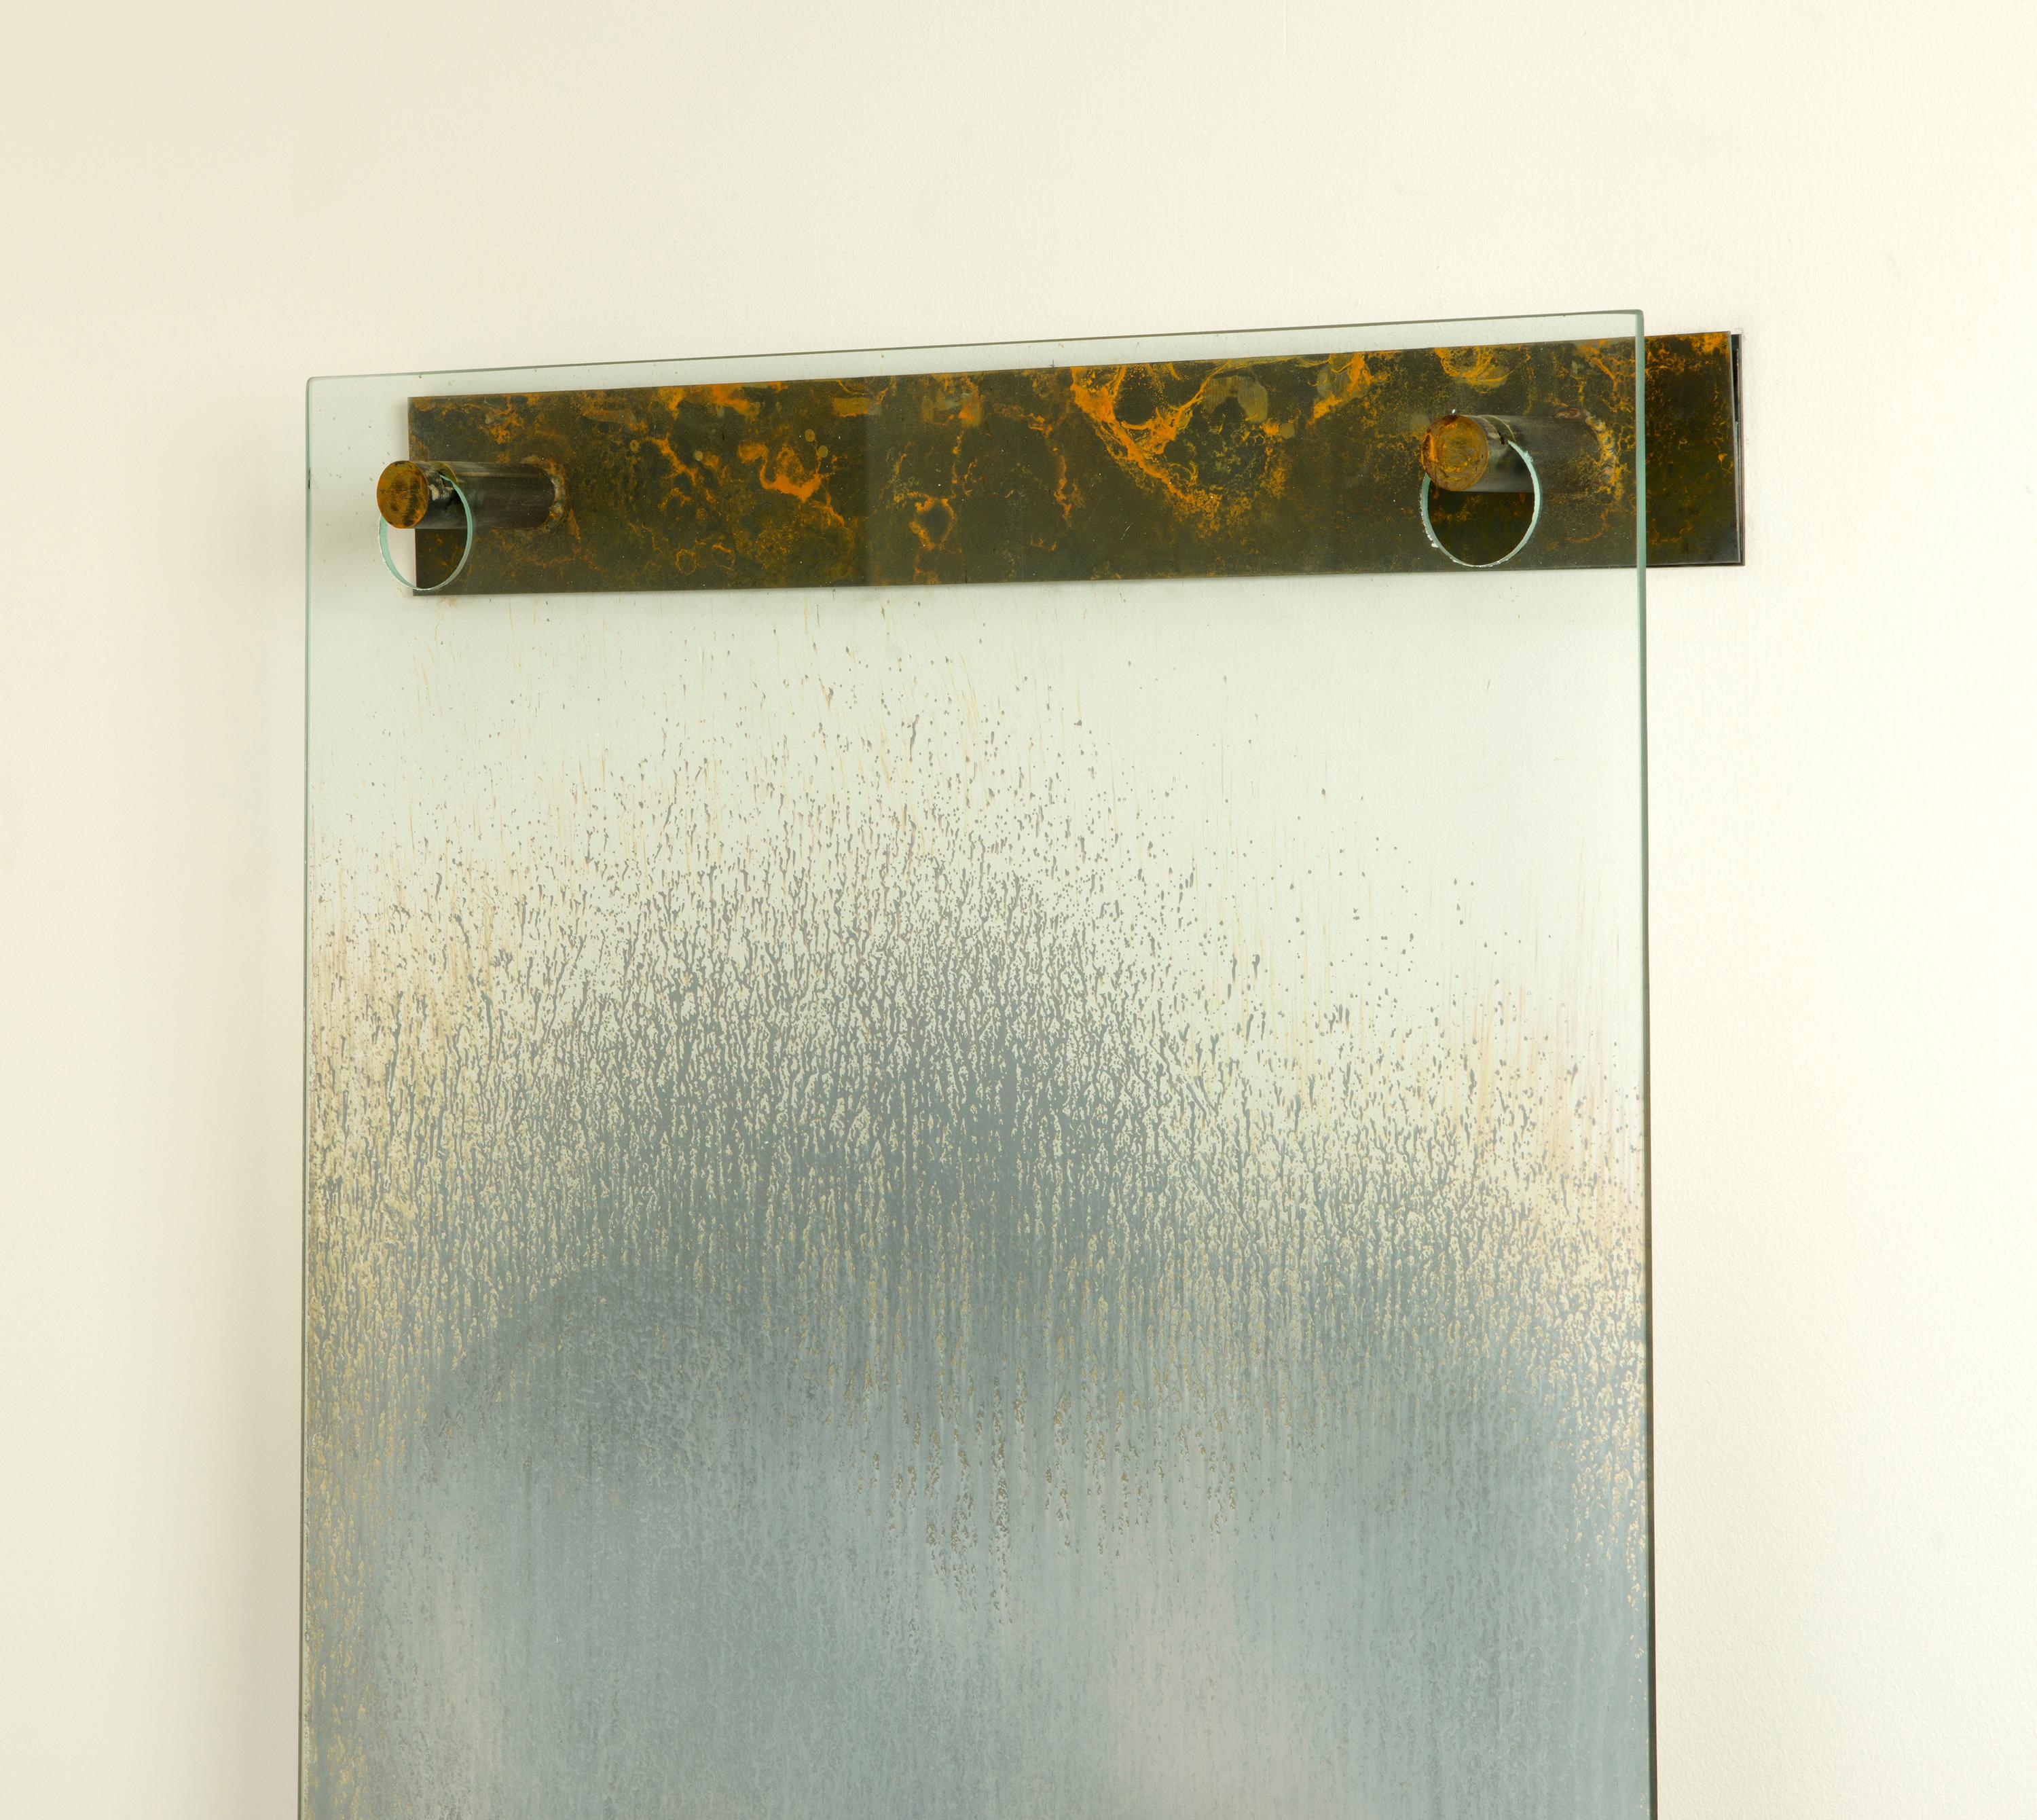 Mirror for Cy Twombly
Gregory Nangle, 2016
Silvered glass, bronze bracket with potassium-tobacco meltdown patina
84 x 30 x 4.5 in

Due to the unique variations of the creative process, each piece is one of a kind. 